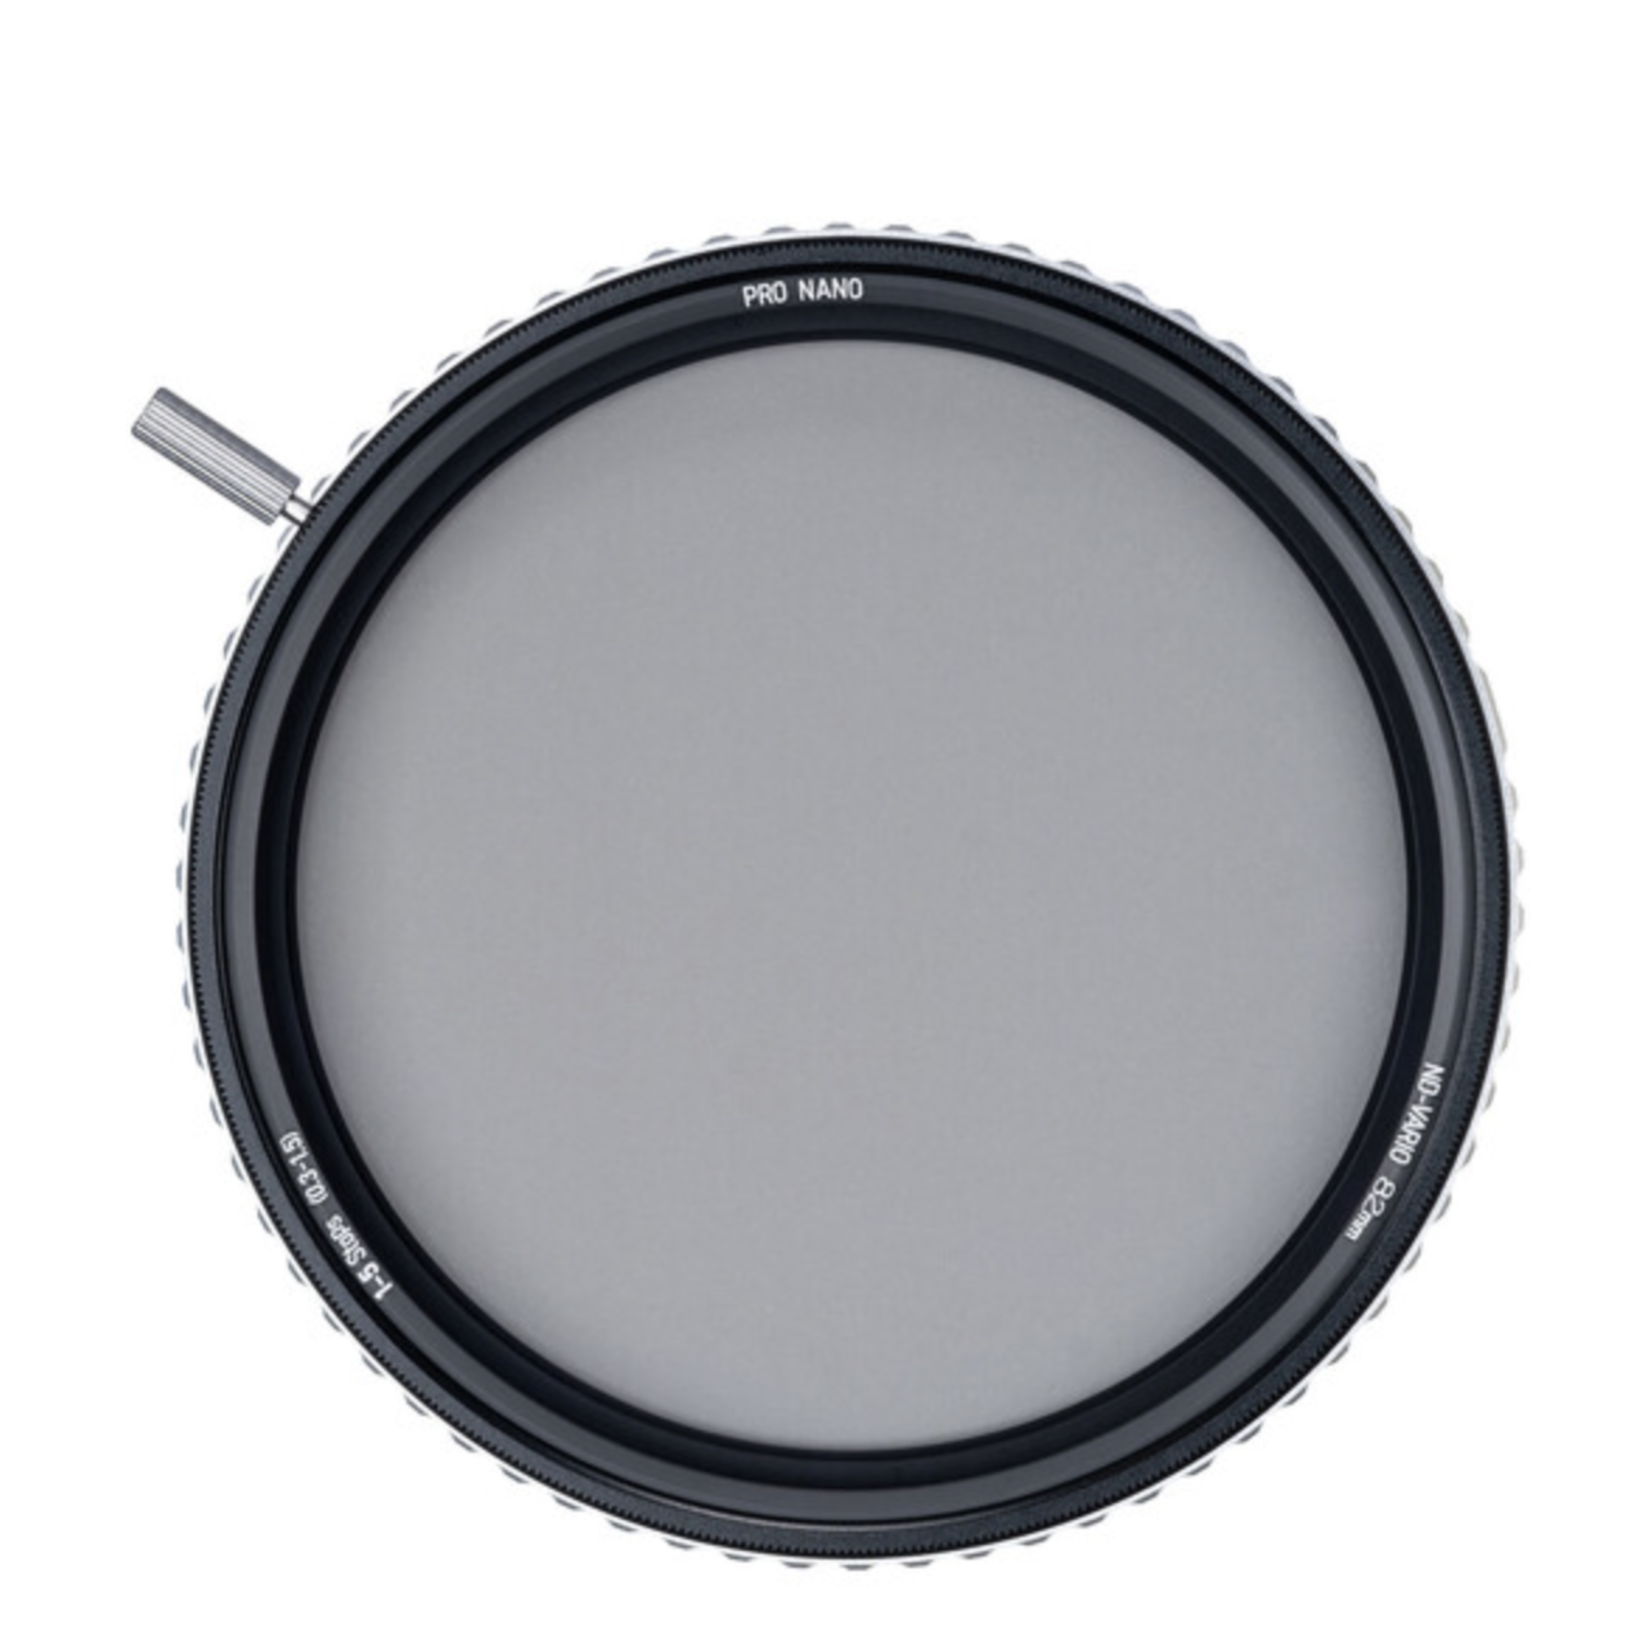 Nisi NiSi True Color ND-VARIO Pro Nano 1 to 5-Stop Variable ND Filter (95mm)